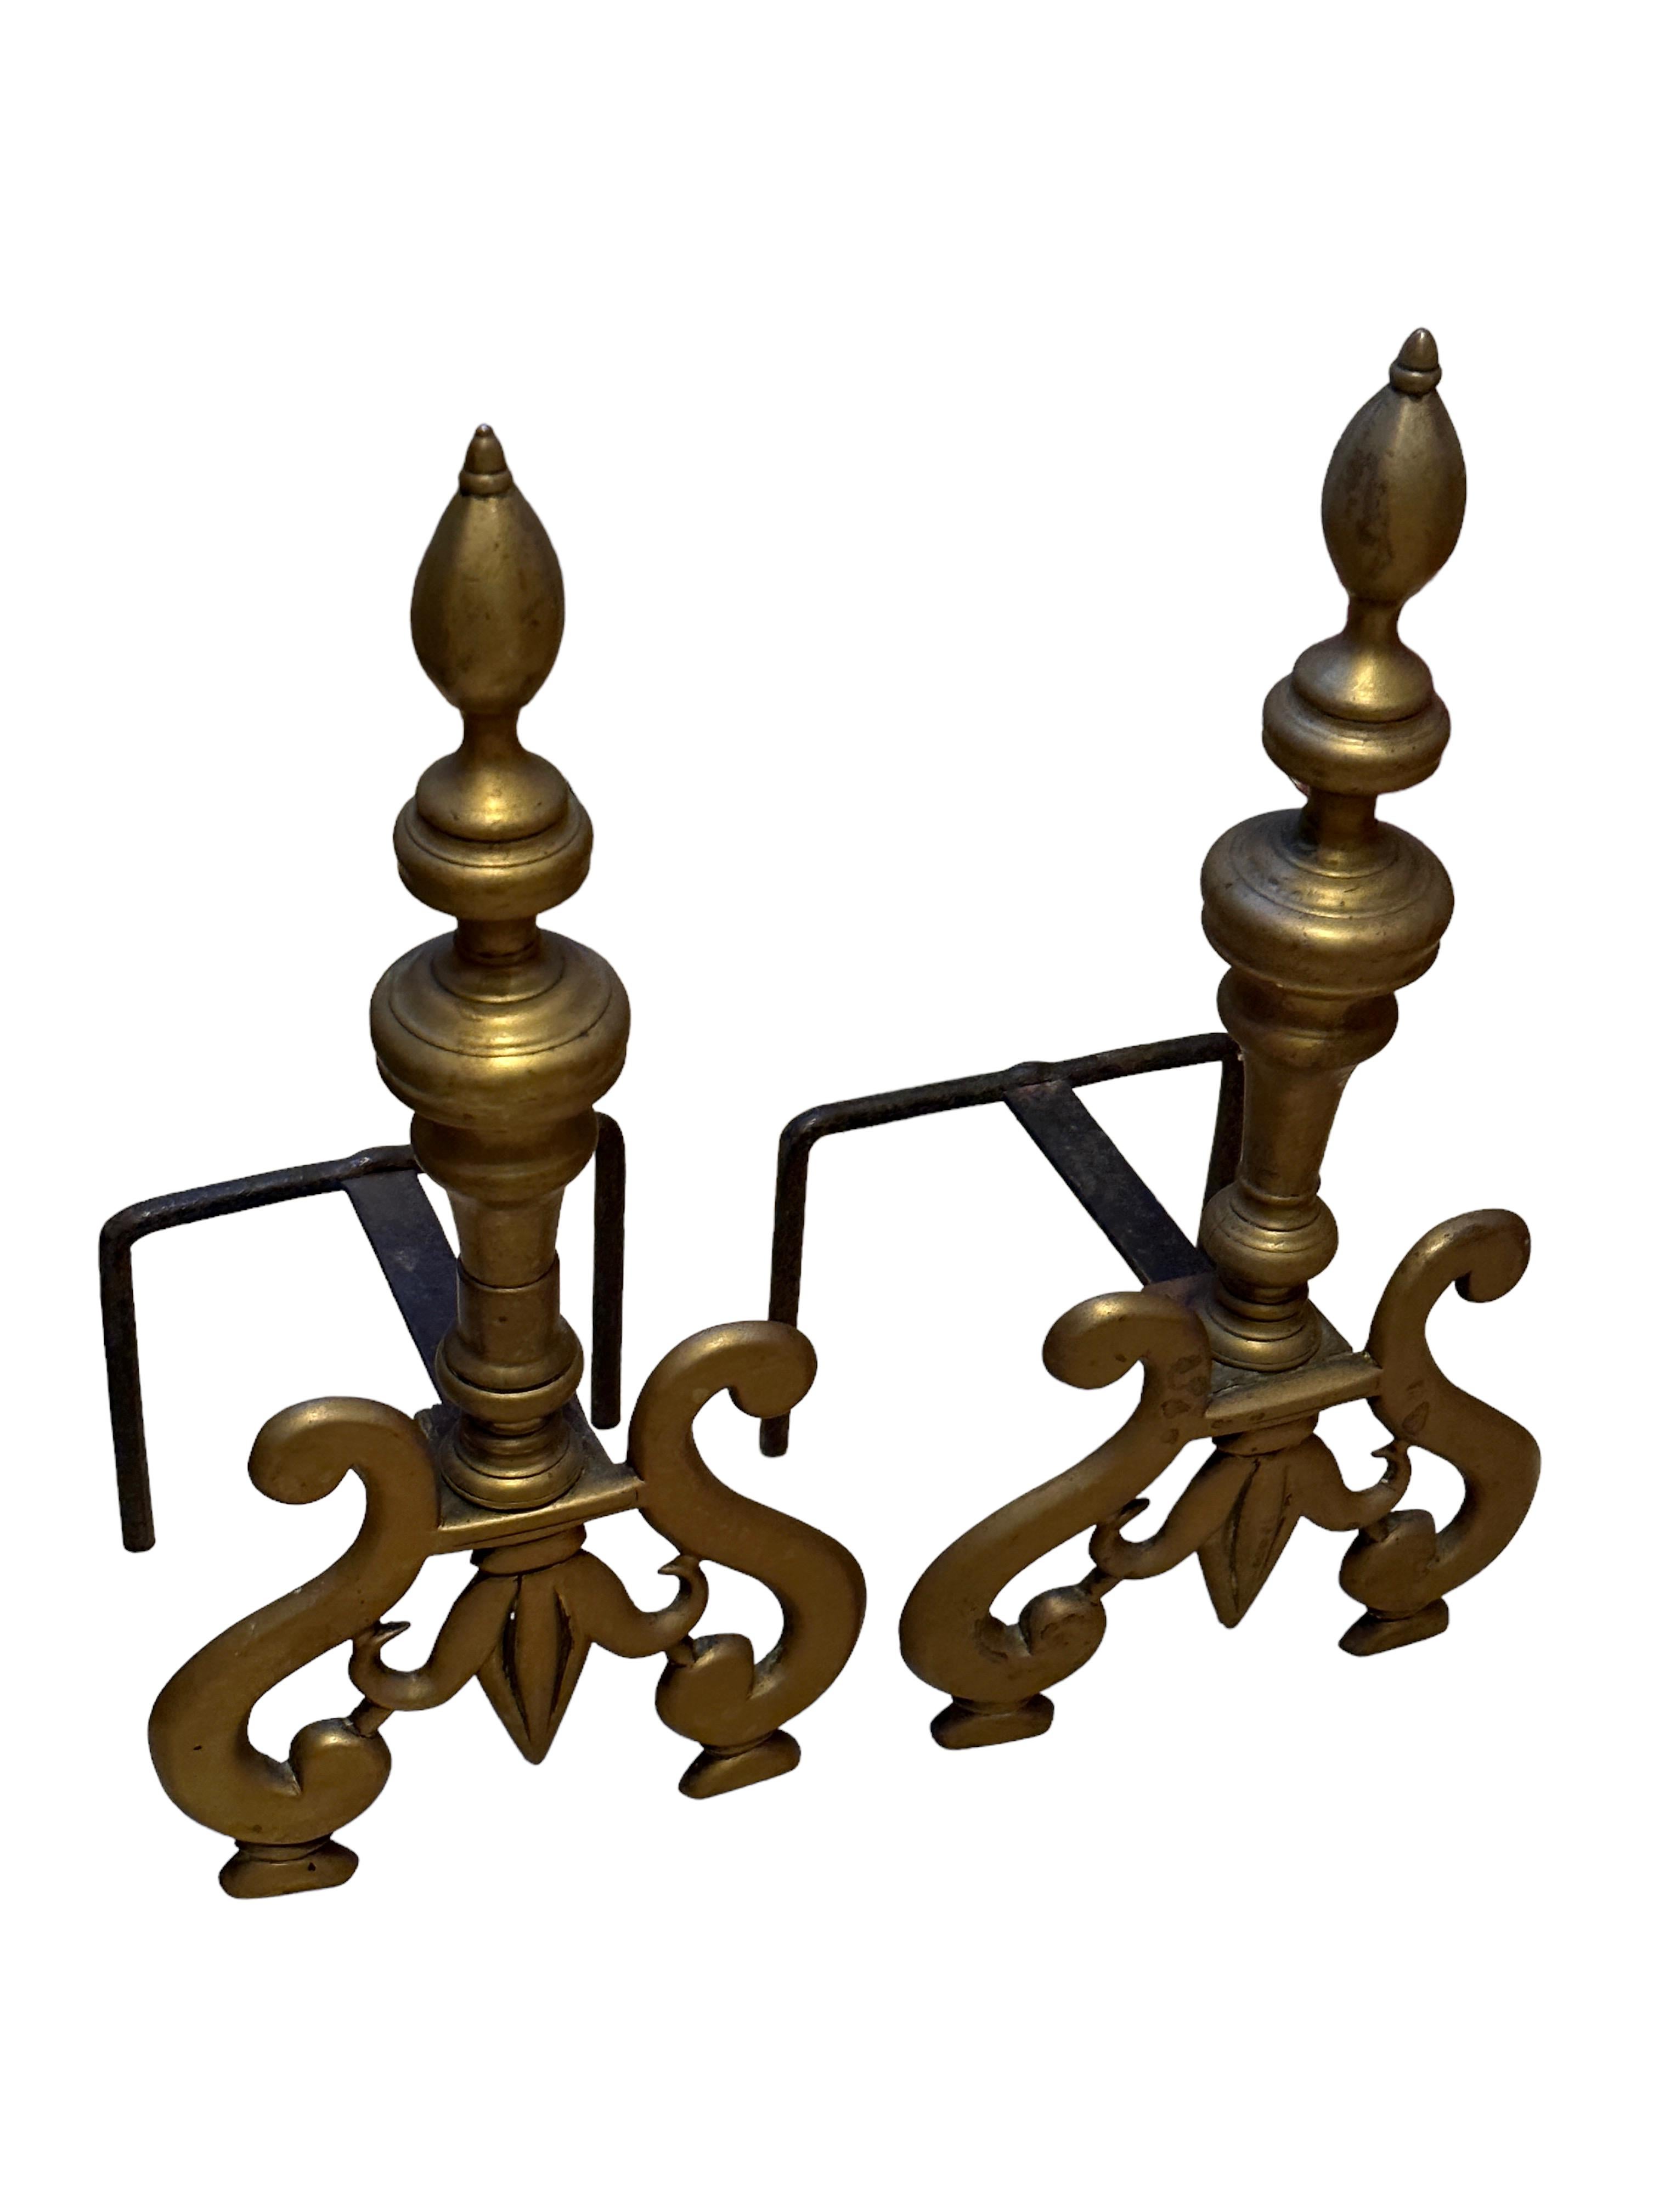 Beautiful stunning sculptural andirons. Showing french lilies on the front. A beautiful nice pair for your fire place. They are in original used condition.